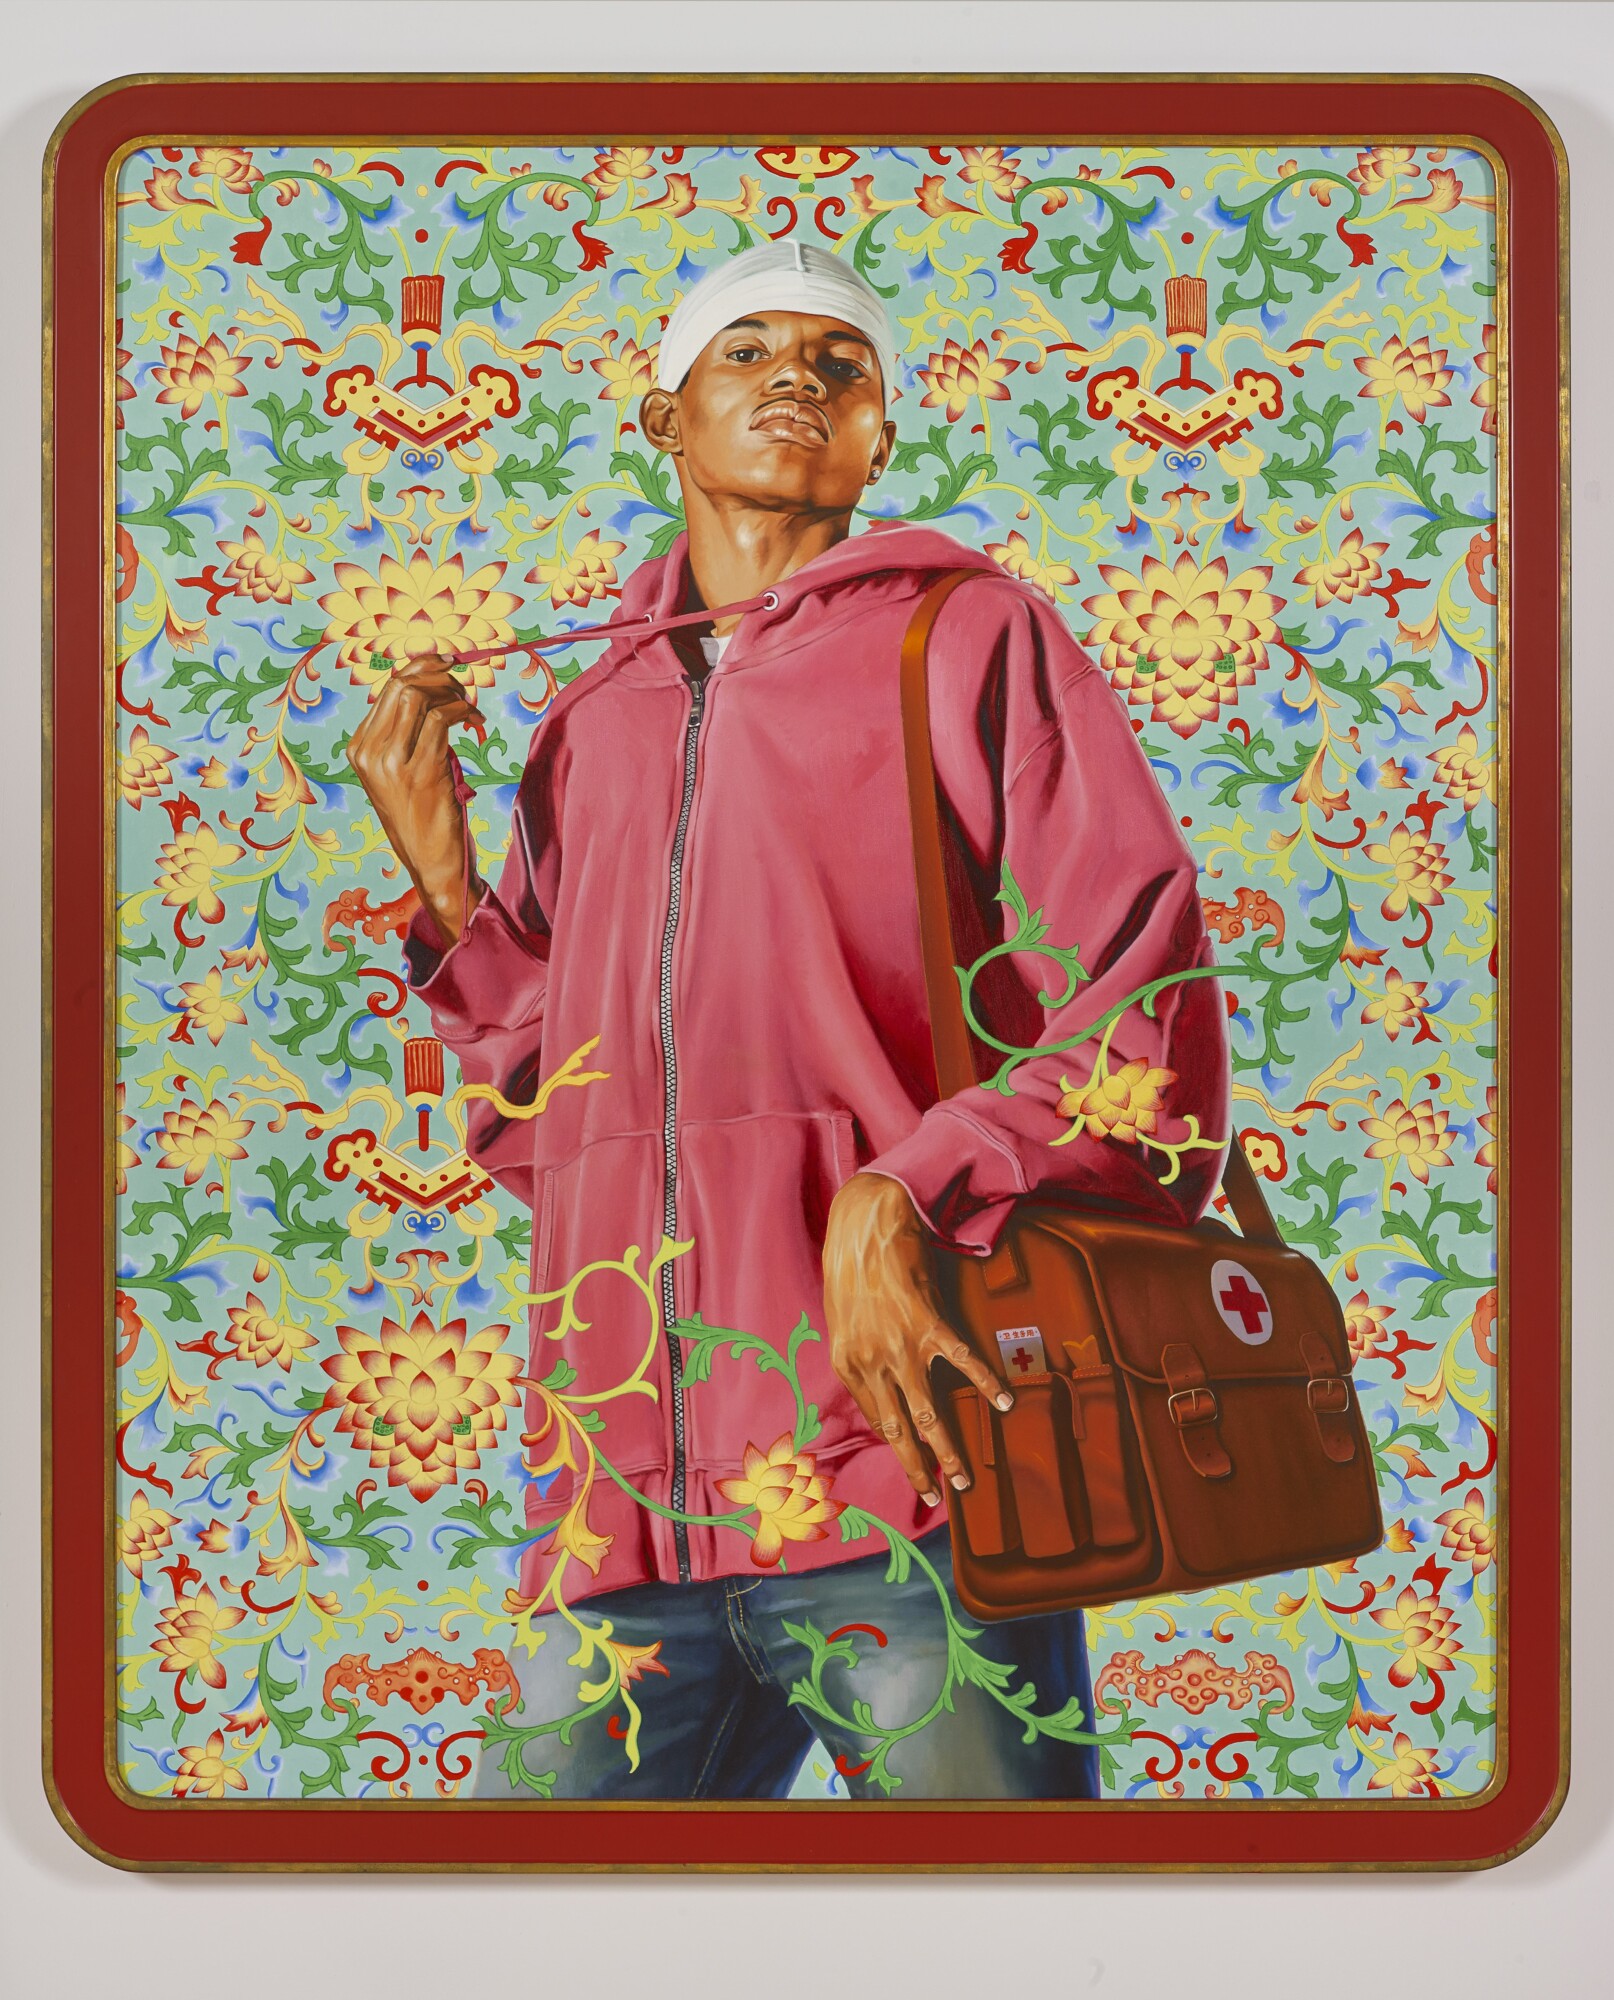 kehindewiley_a new republic_Support the Rural Population and Serve 500 Million Peasants